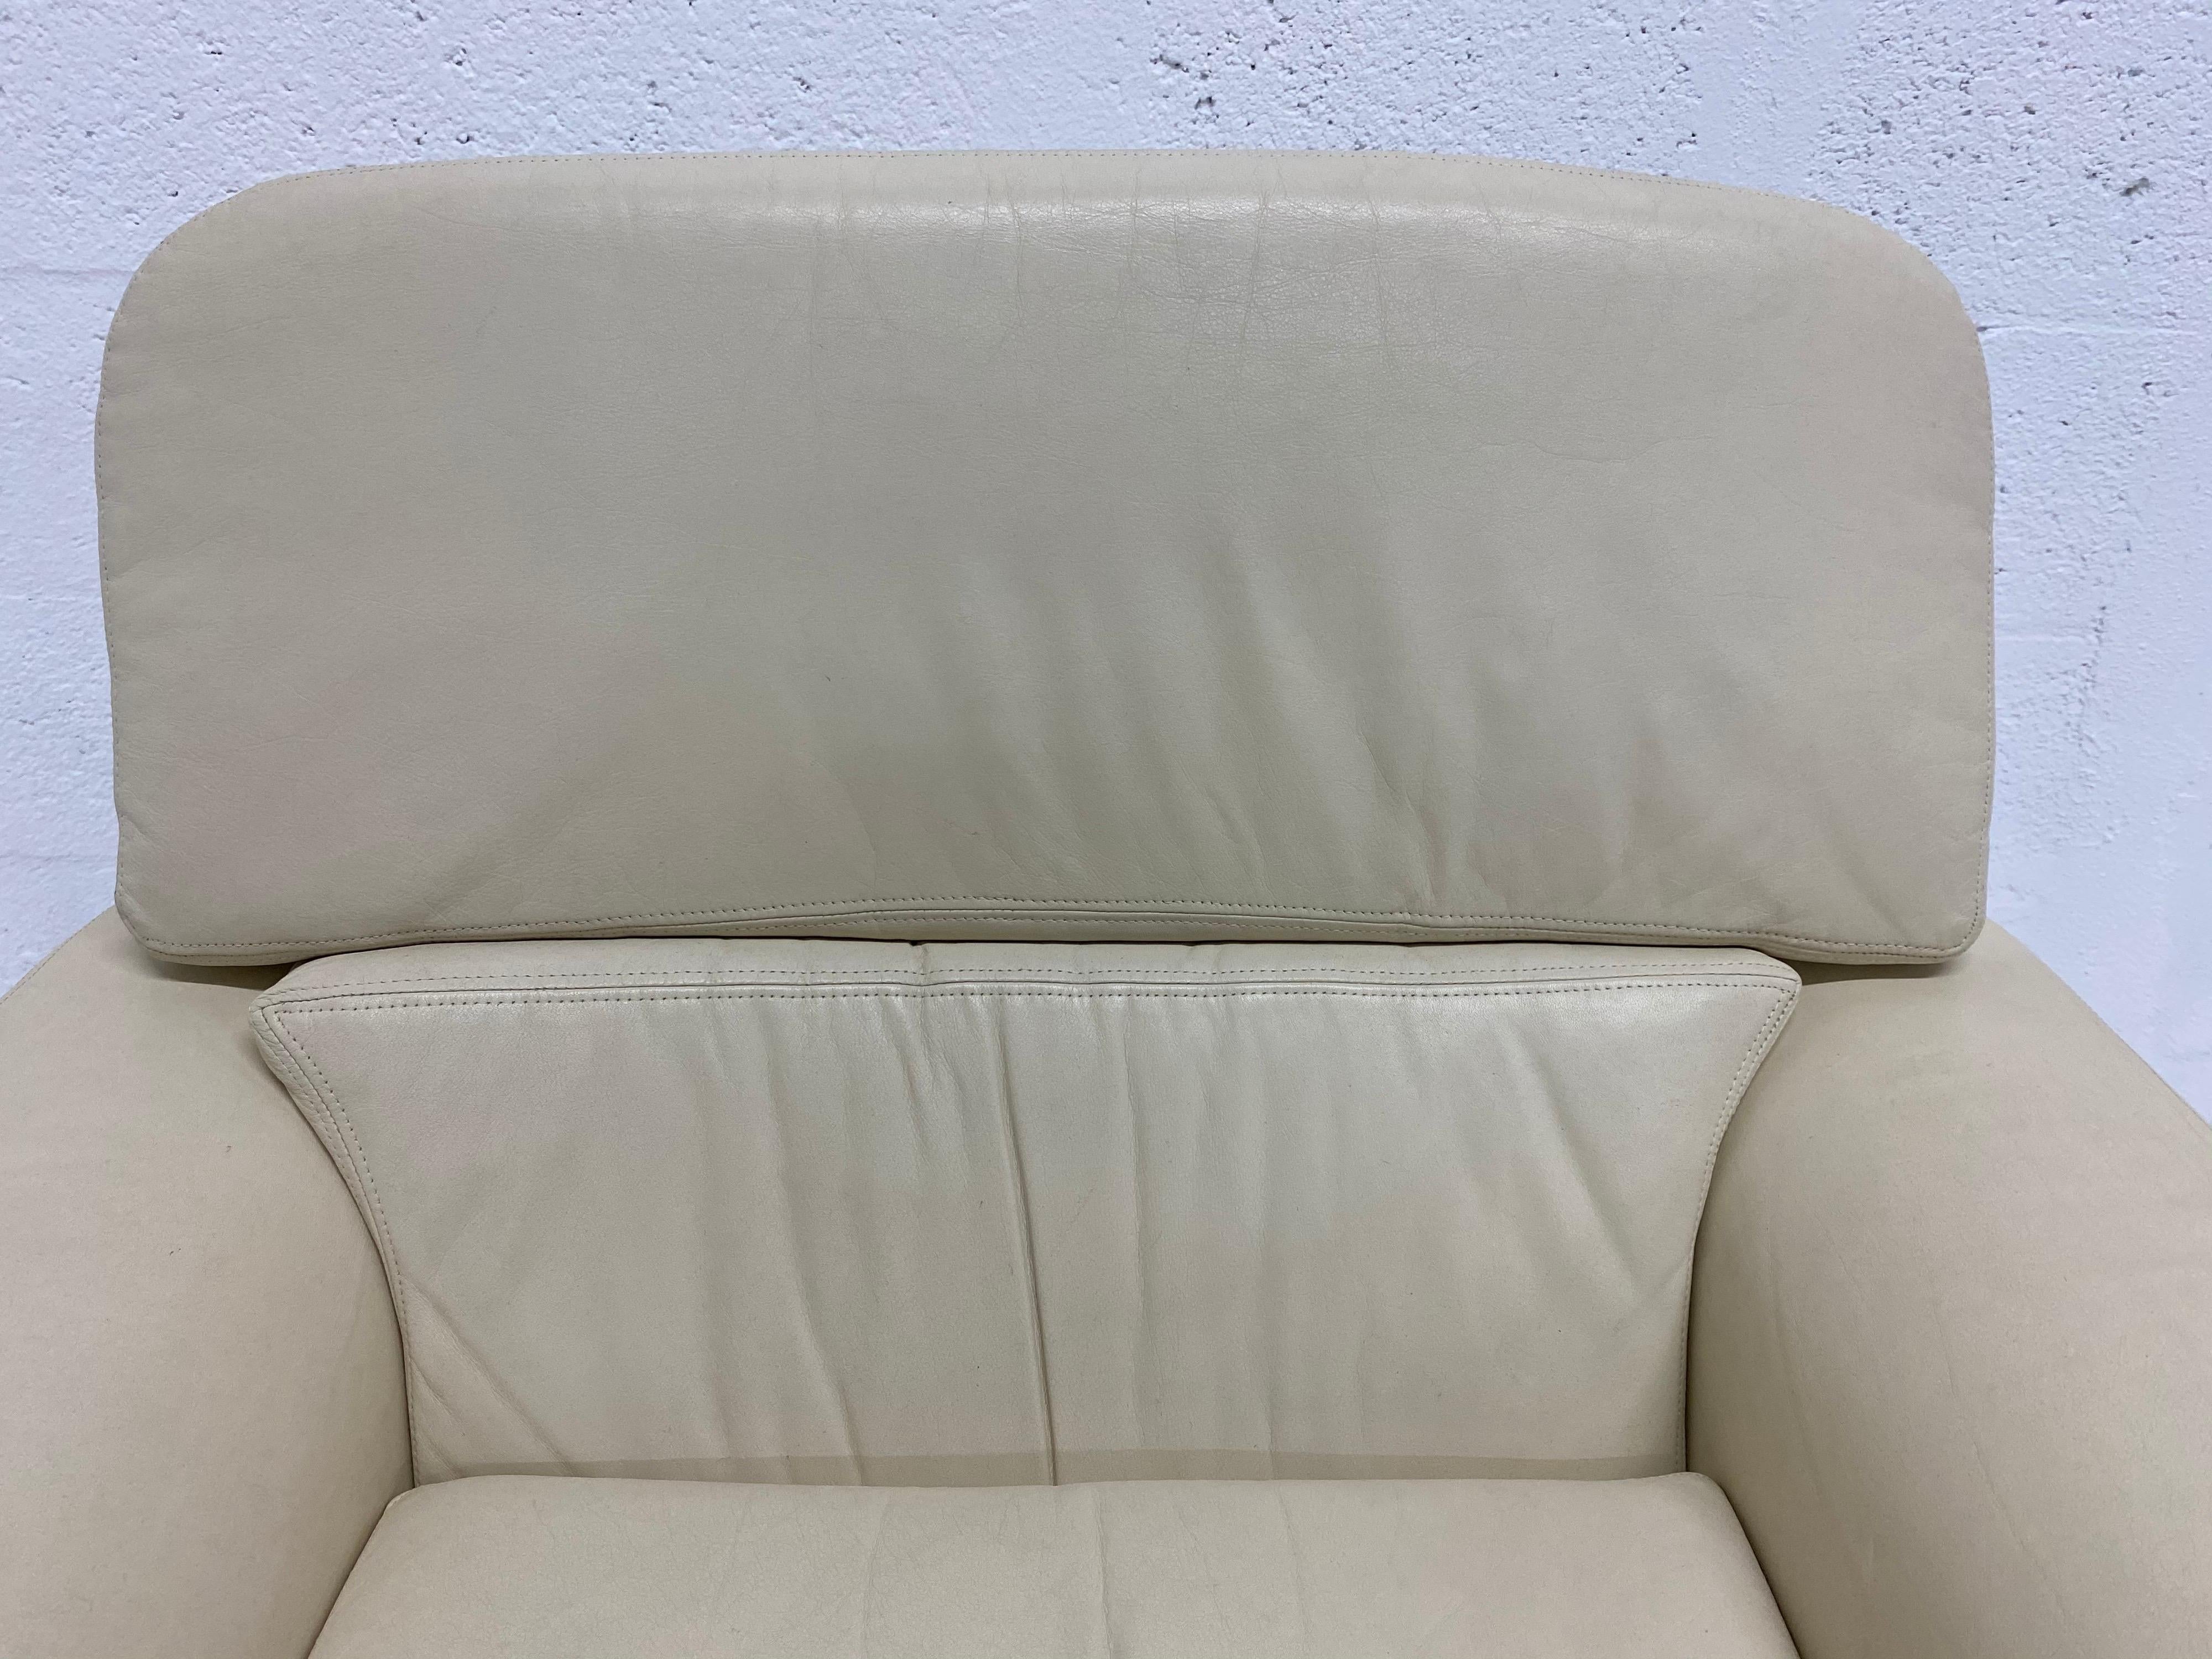 Late 20th Century Vladimir Kagan Attr. Cream Leather Lounge Chair for Preview, 1980s